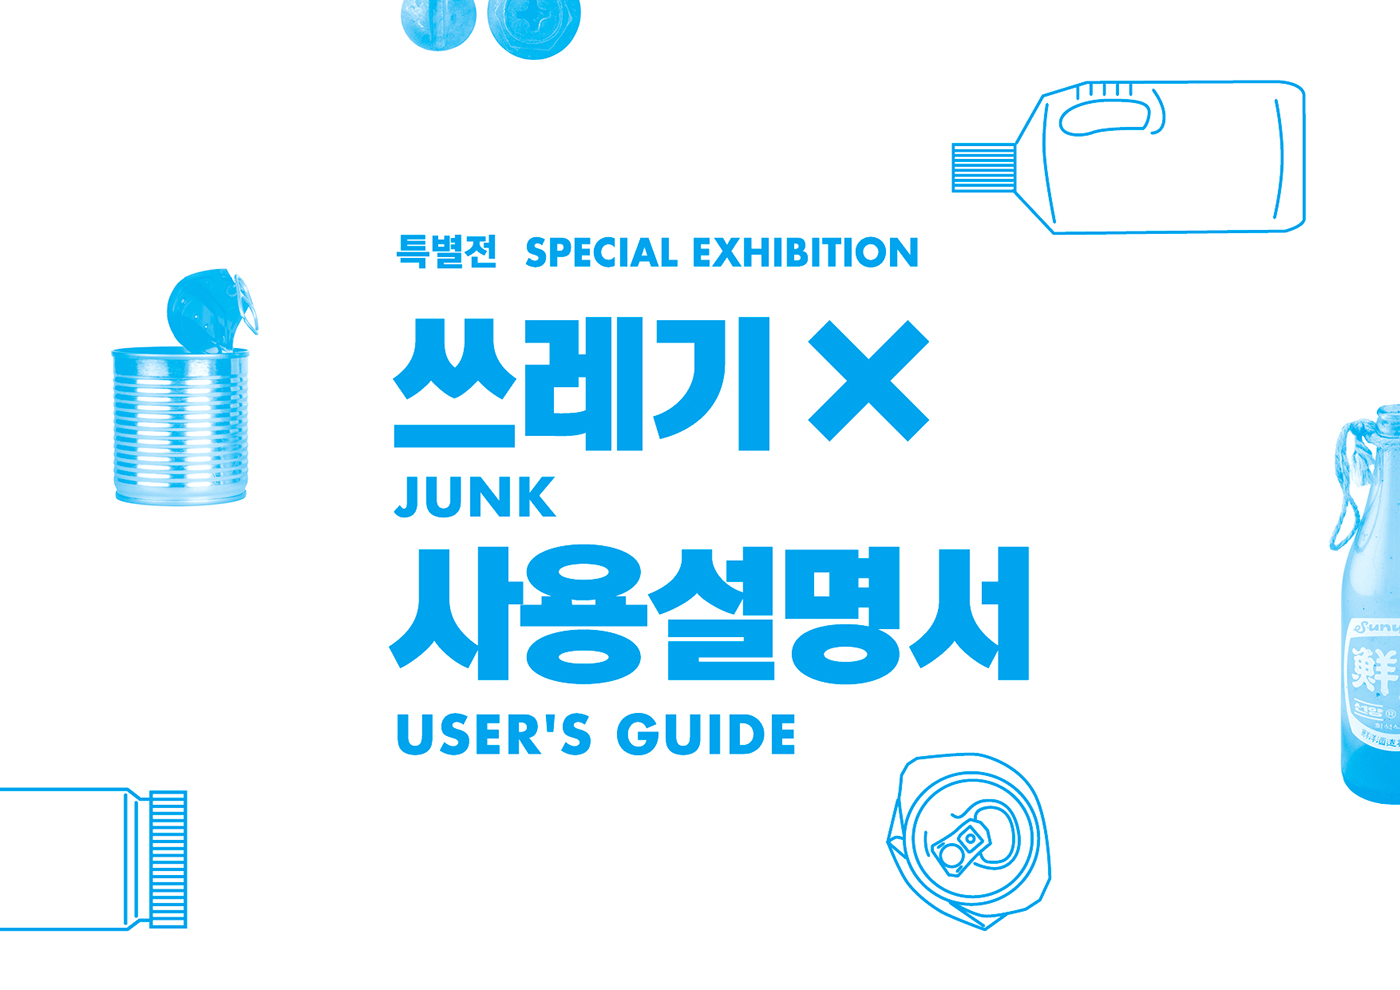 junk user's guide Inforgraphic Exhibition graphic 국립민속박물관 recycle MuCEM